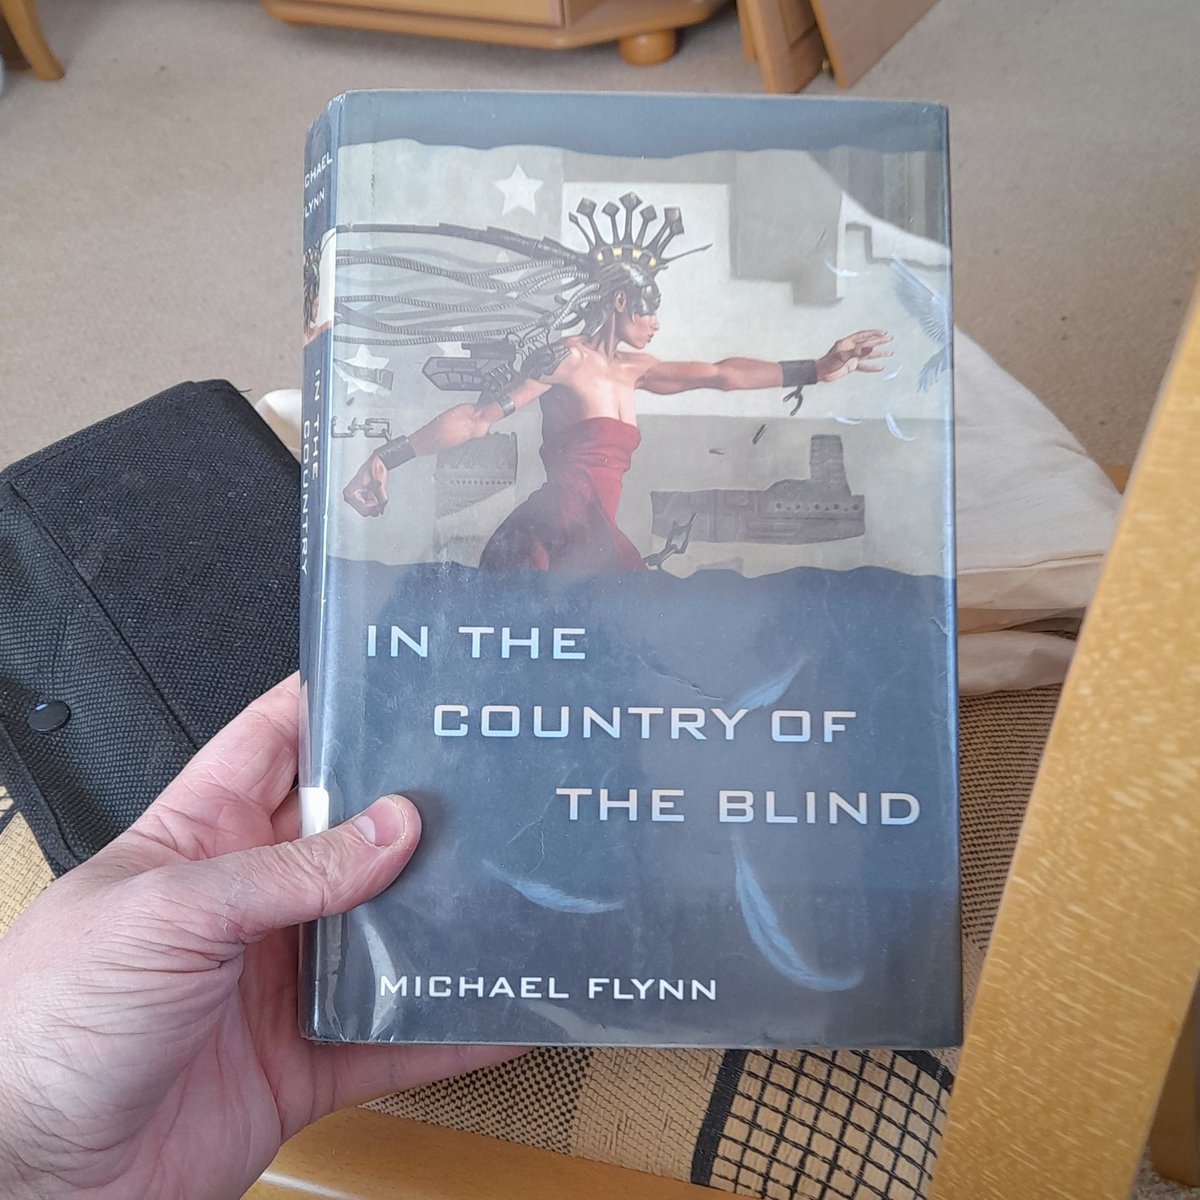 I only found out today that Michael Flynn, writer of this great book here pictured, died in September last year.

An interesting #scifi writer has been lost.
#authorsofig #tribute #authorlife #booktwitter